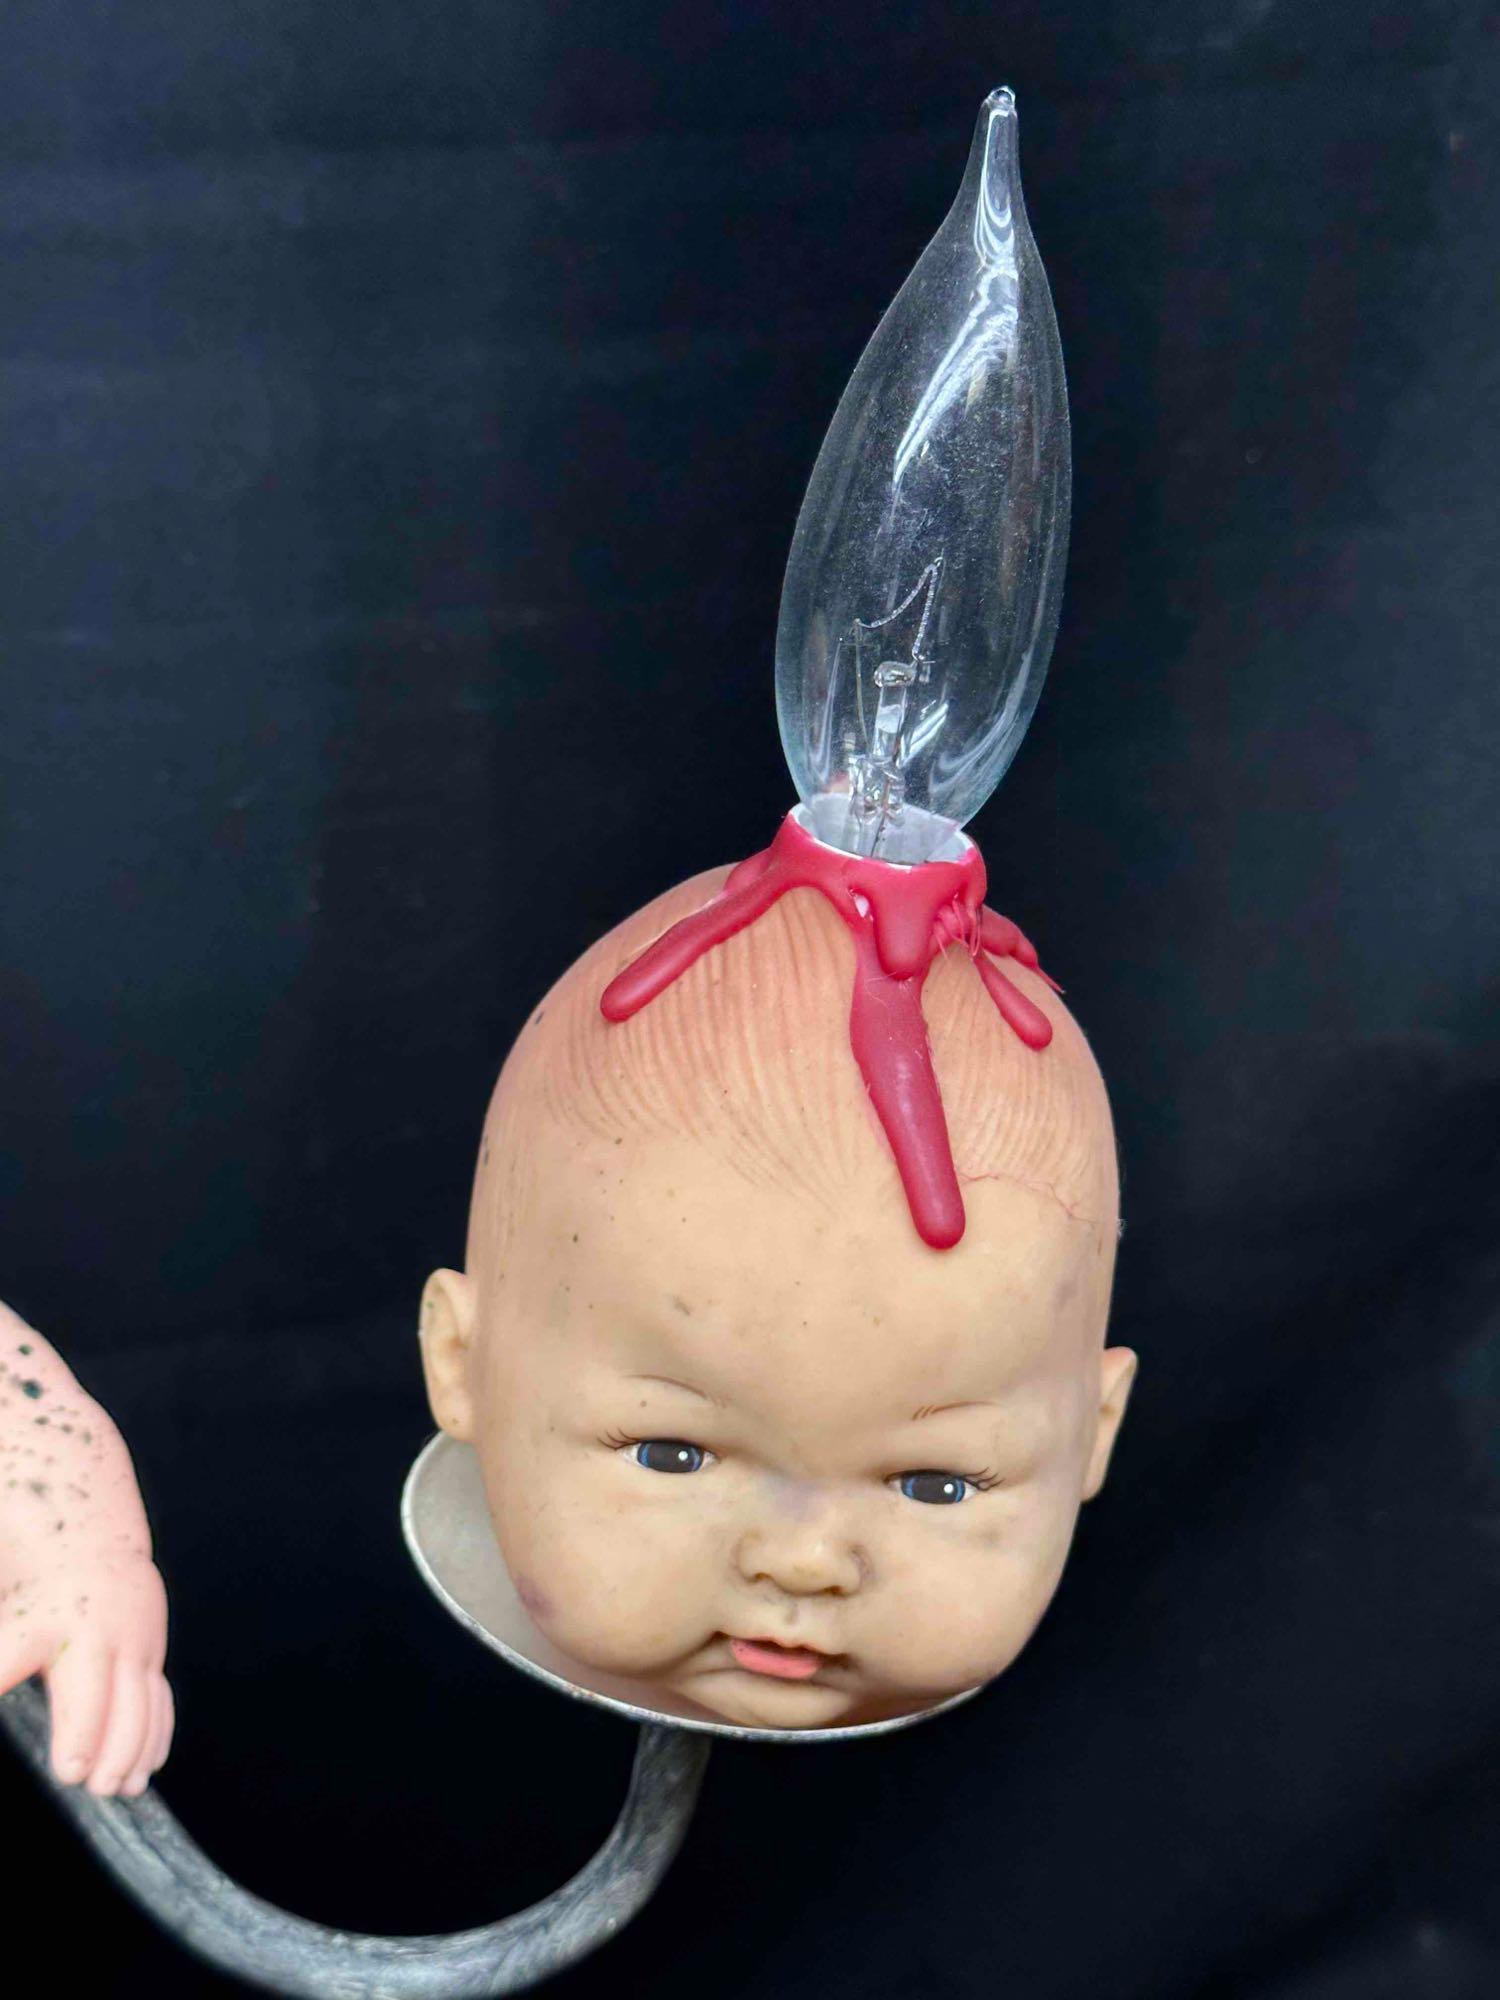 1 of a Kind Haunted Creepy Baby Doll Lamp Local Artist Unsettling Halloween